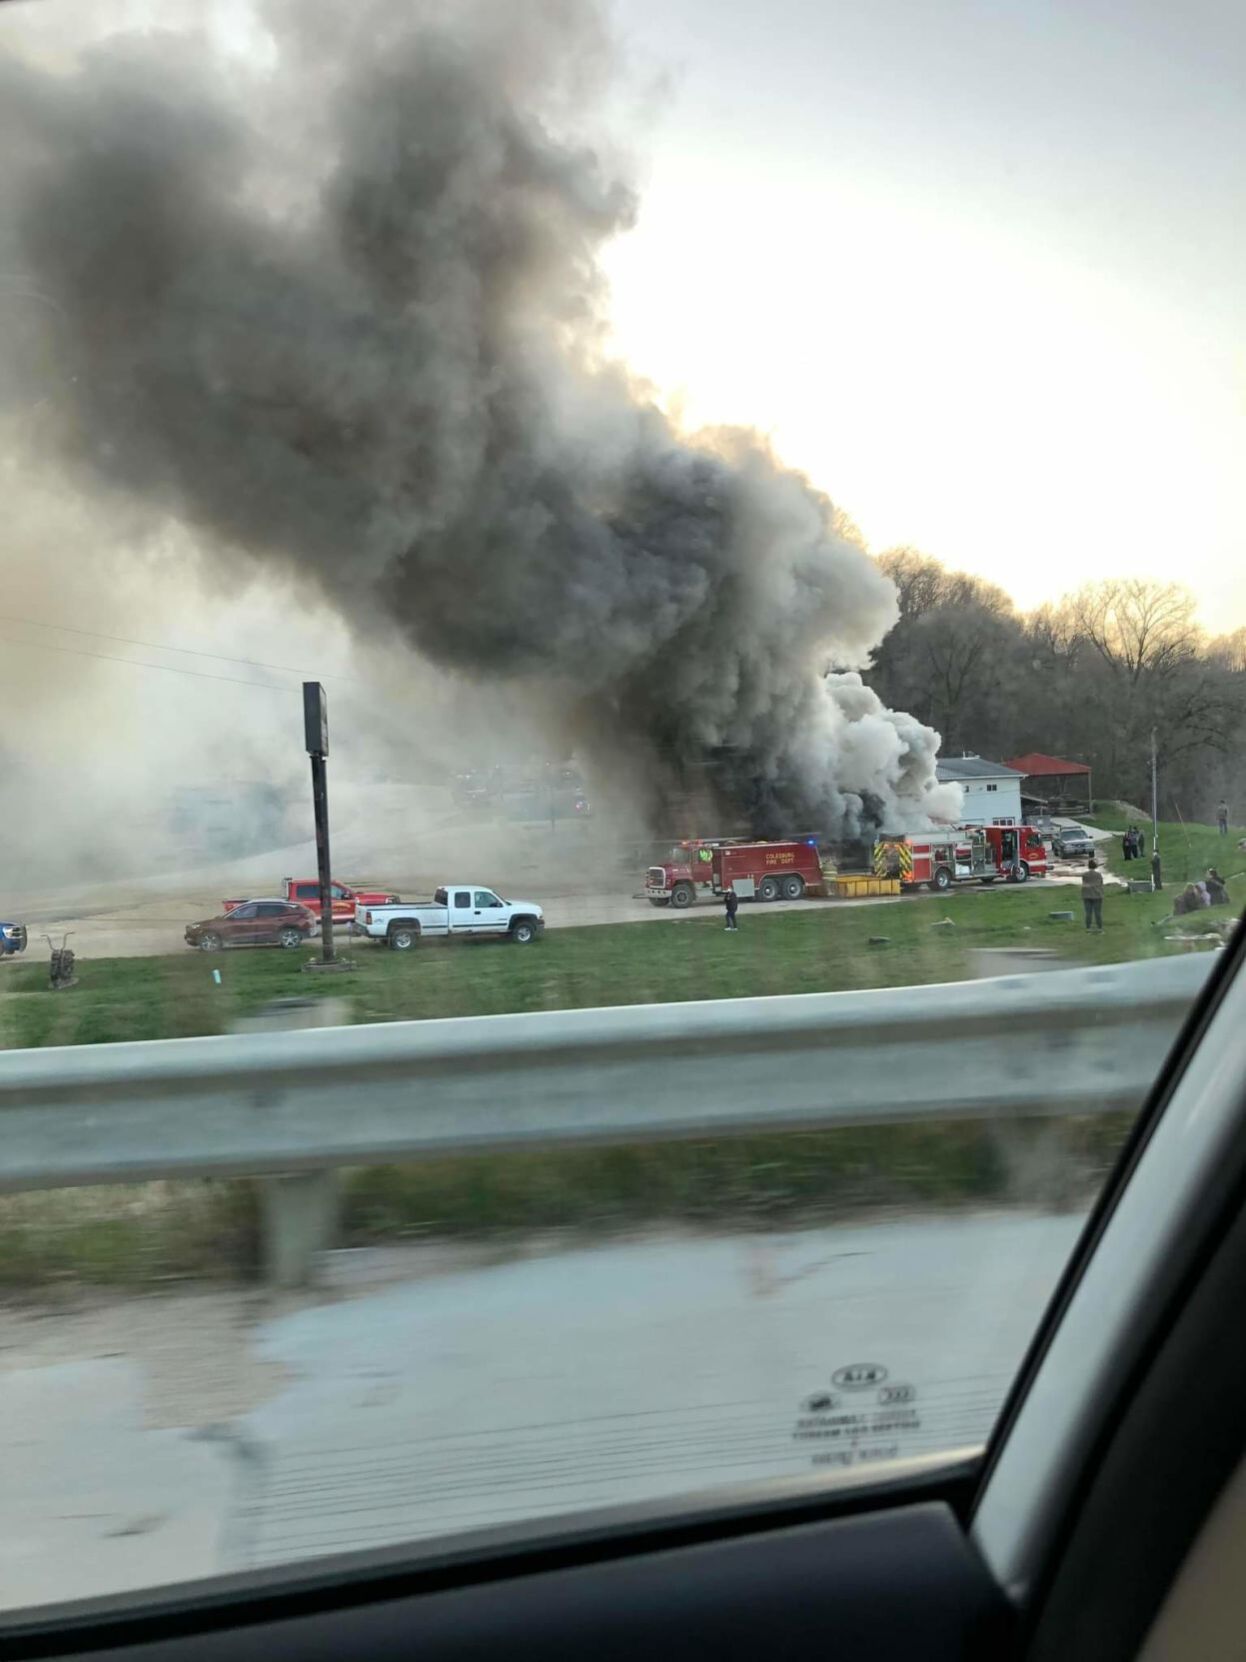 A fire destroyed Bootleggers River Tavern on Tuesday night in southern Clayton County, along the Turkey River off of U.S. 52.    PHOTO CREDIT: Guttenberg Fire Department